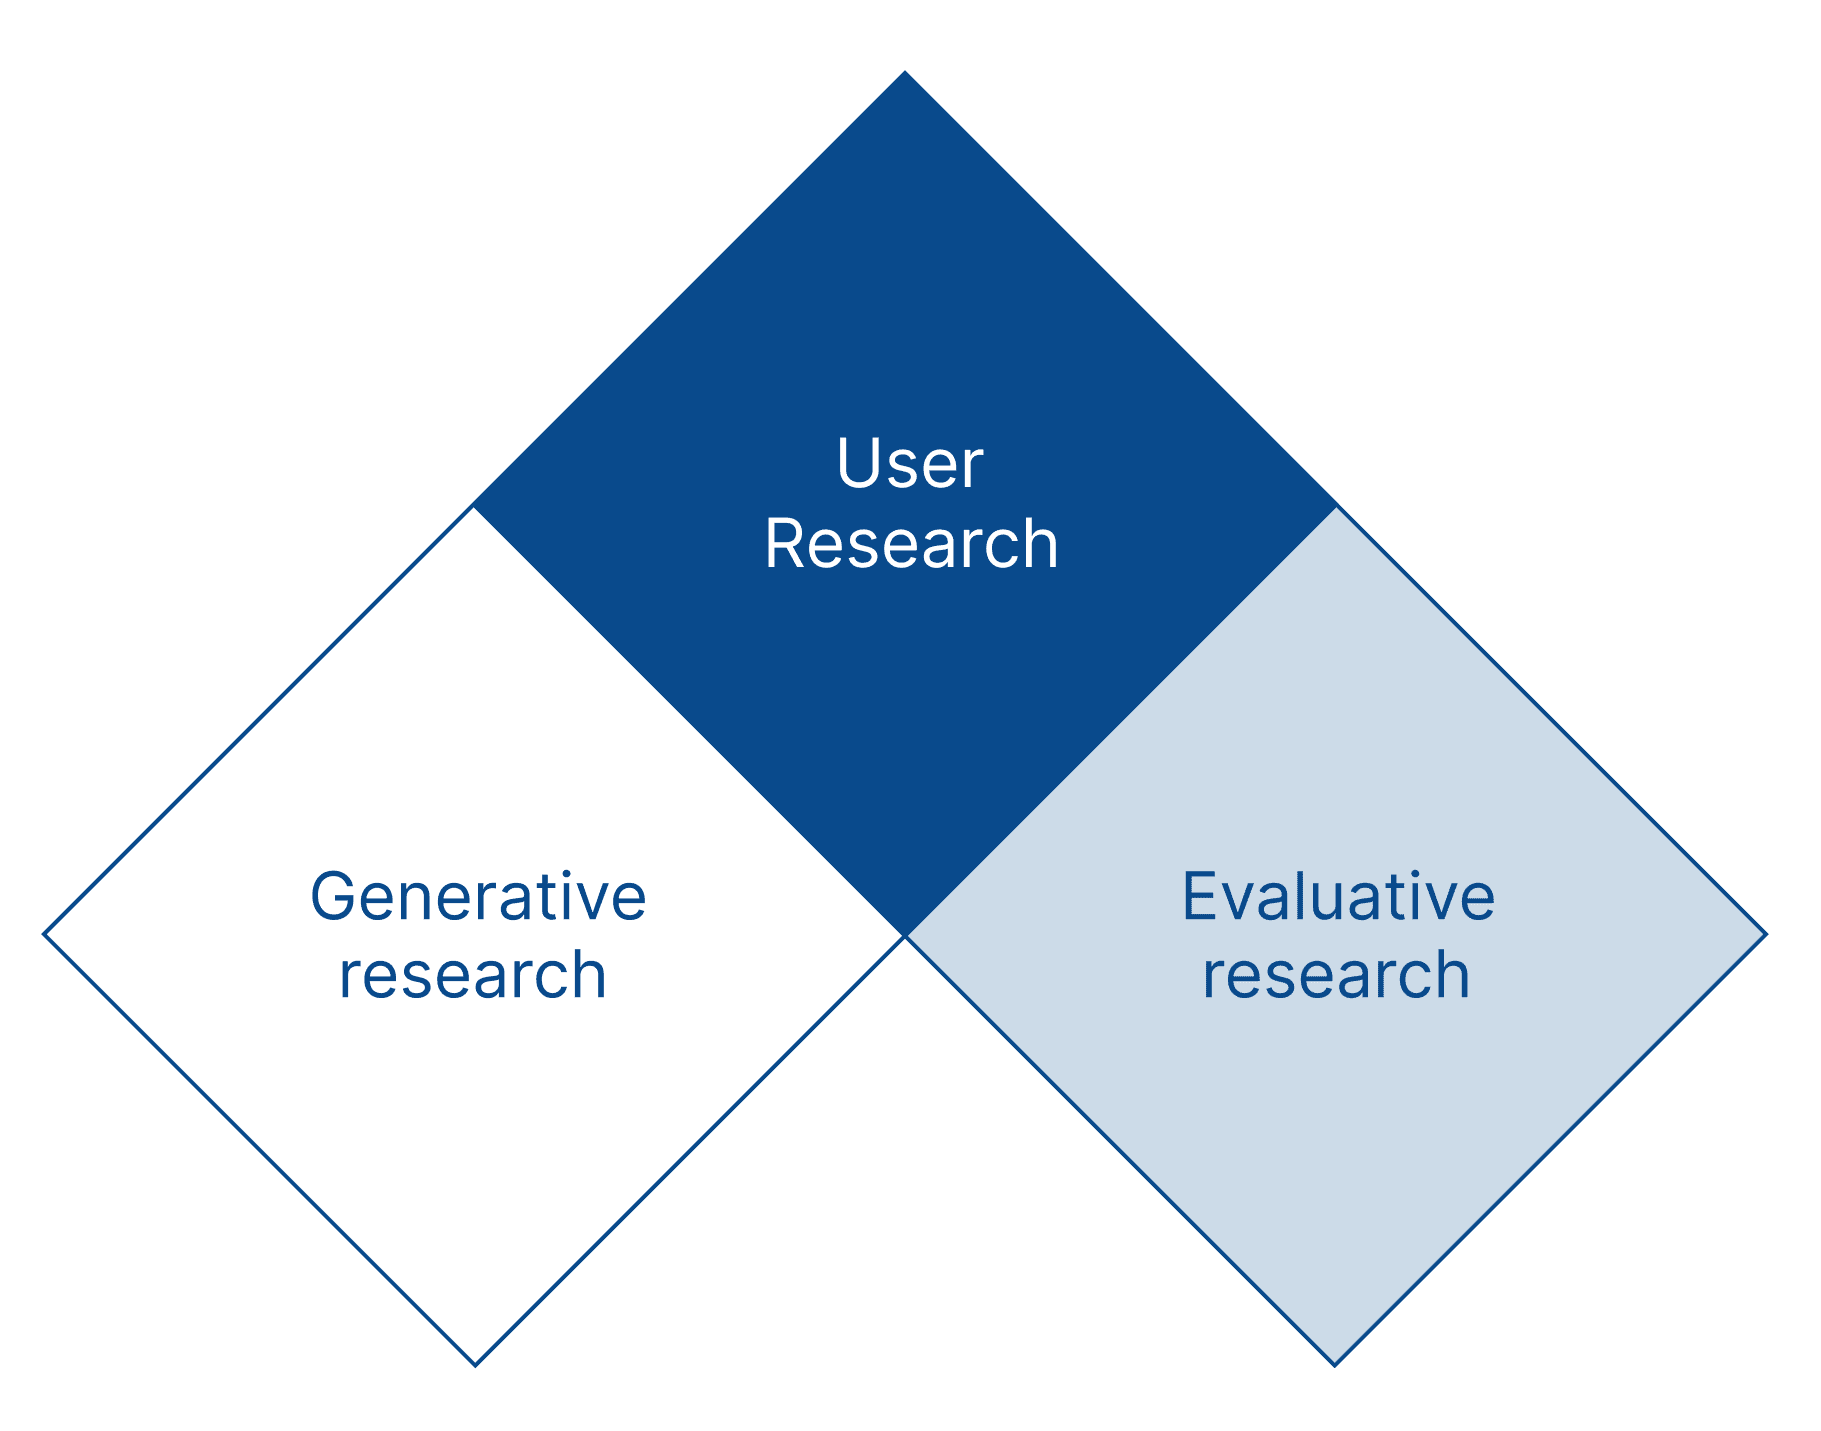 Research Strategy chevron diagram, with User Research supported by Generative and Evaluative approaches